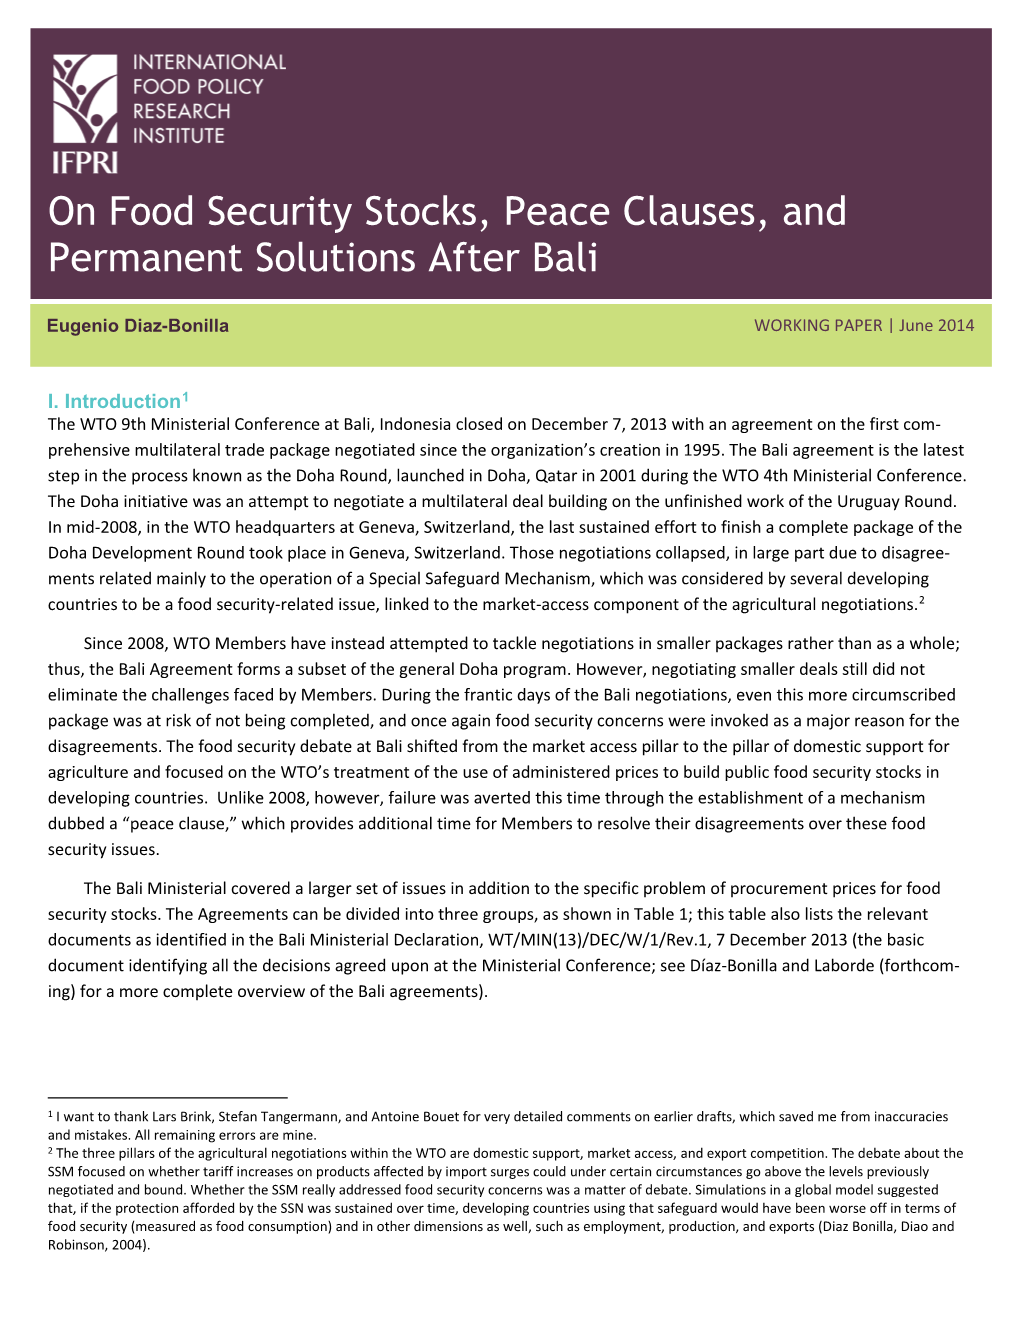 On Food Security Stocks, Peace Clauses, and Permanent Solutions After Bali